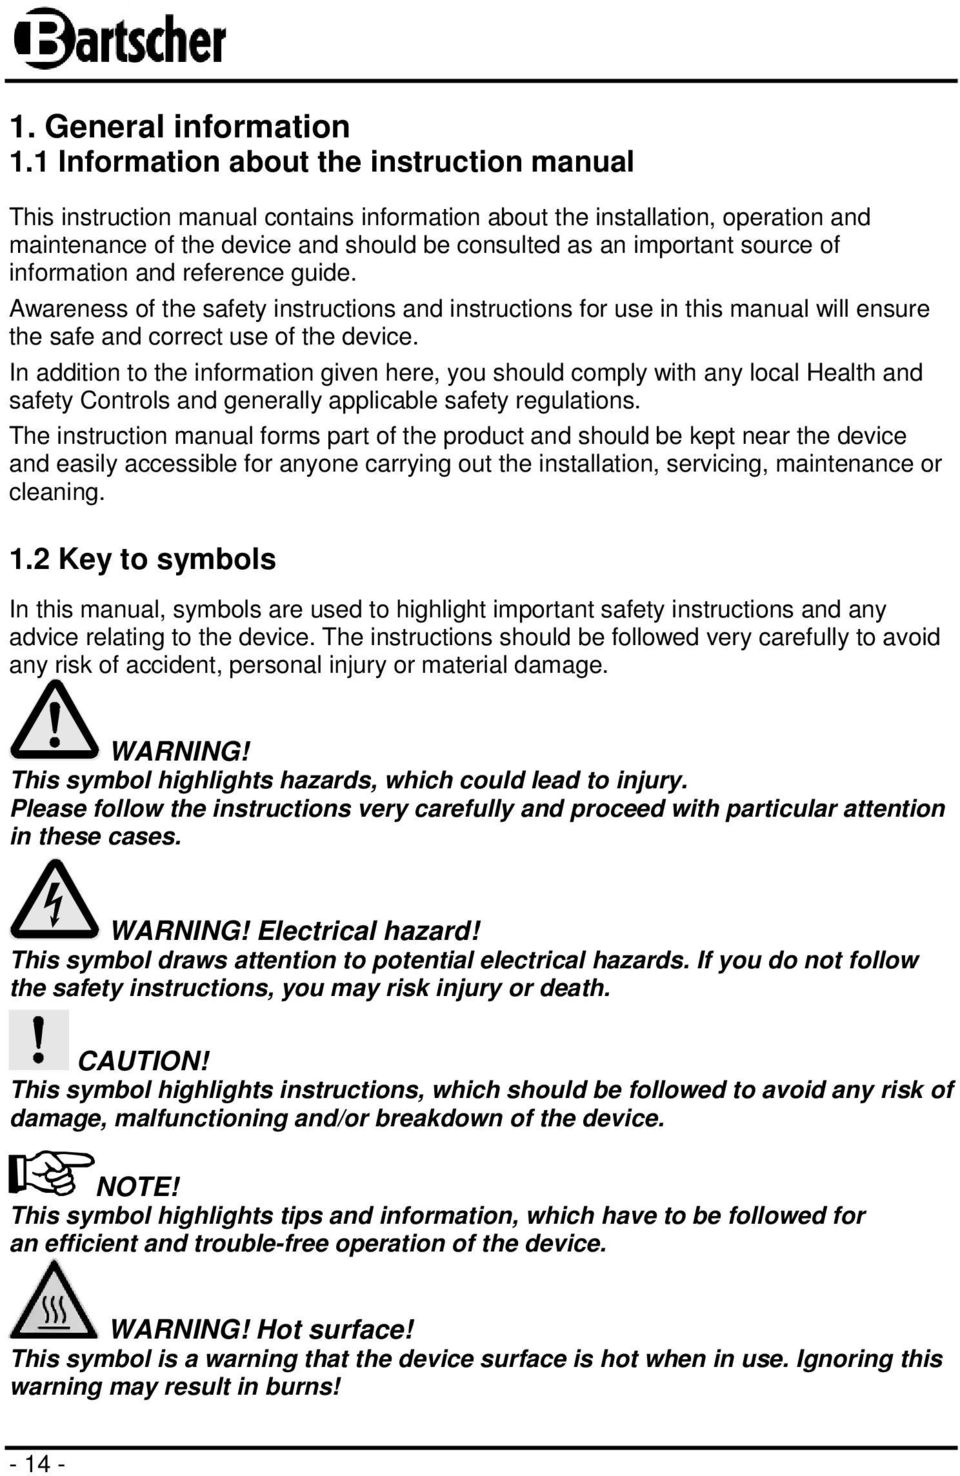 of information and reference guide. Awareness of the safety instructions and instructions for use in this manual will ensure the safe and correct use of the device.